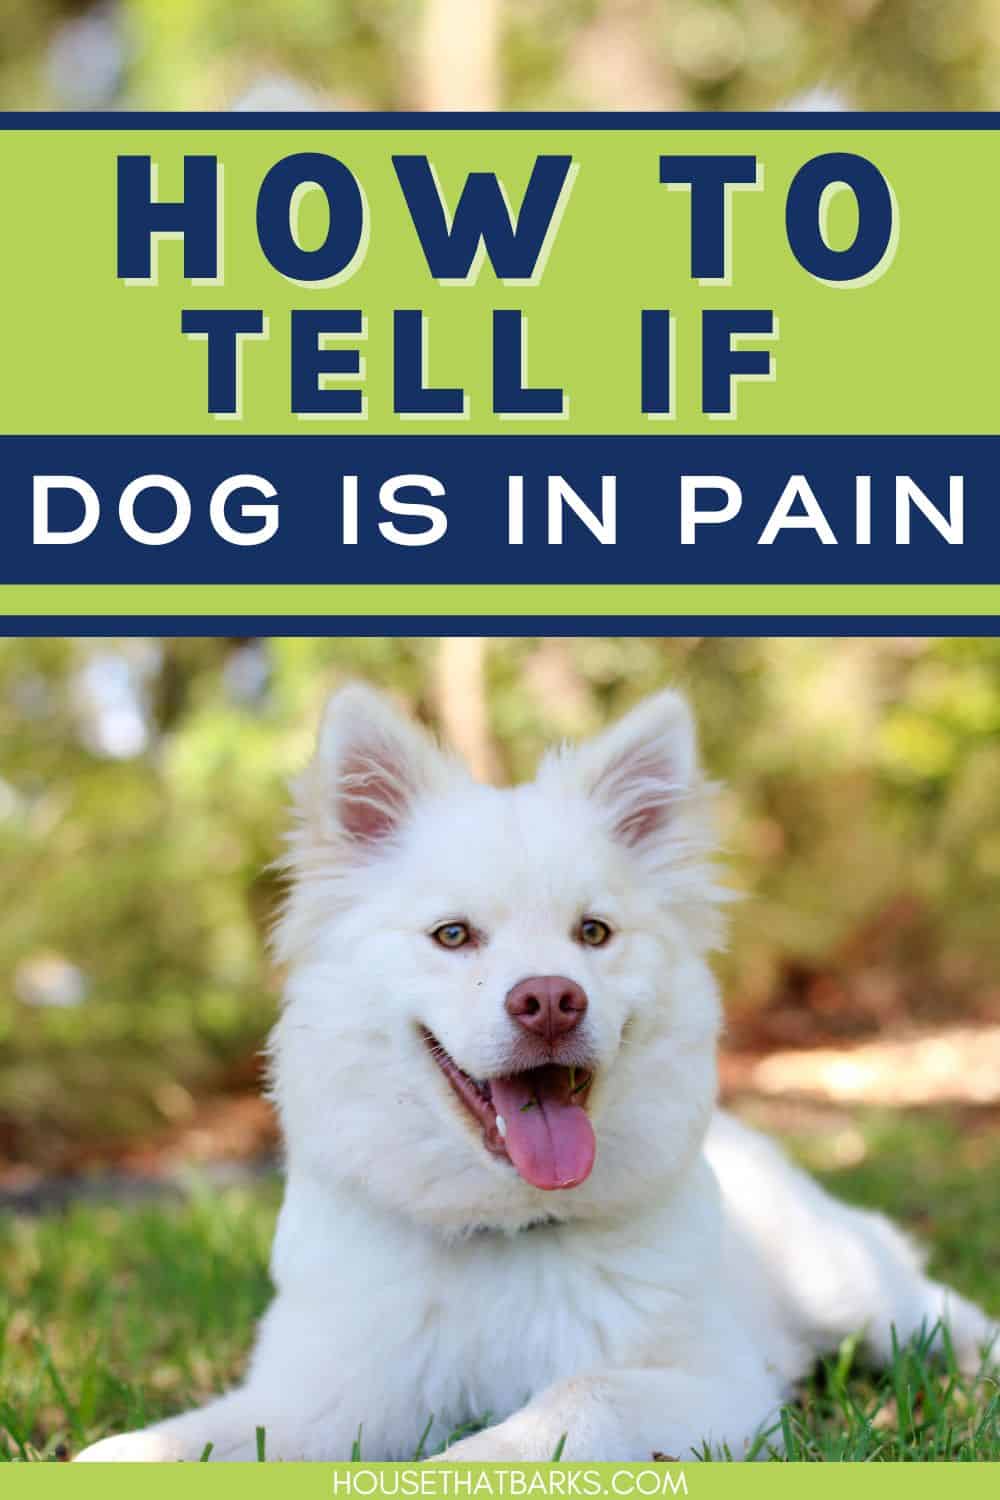 Dog is in pain pin